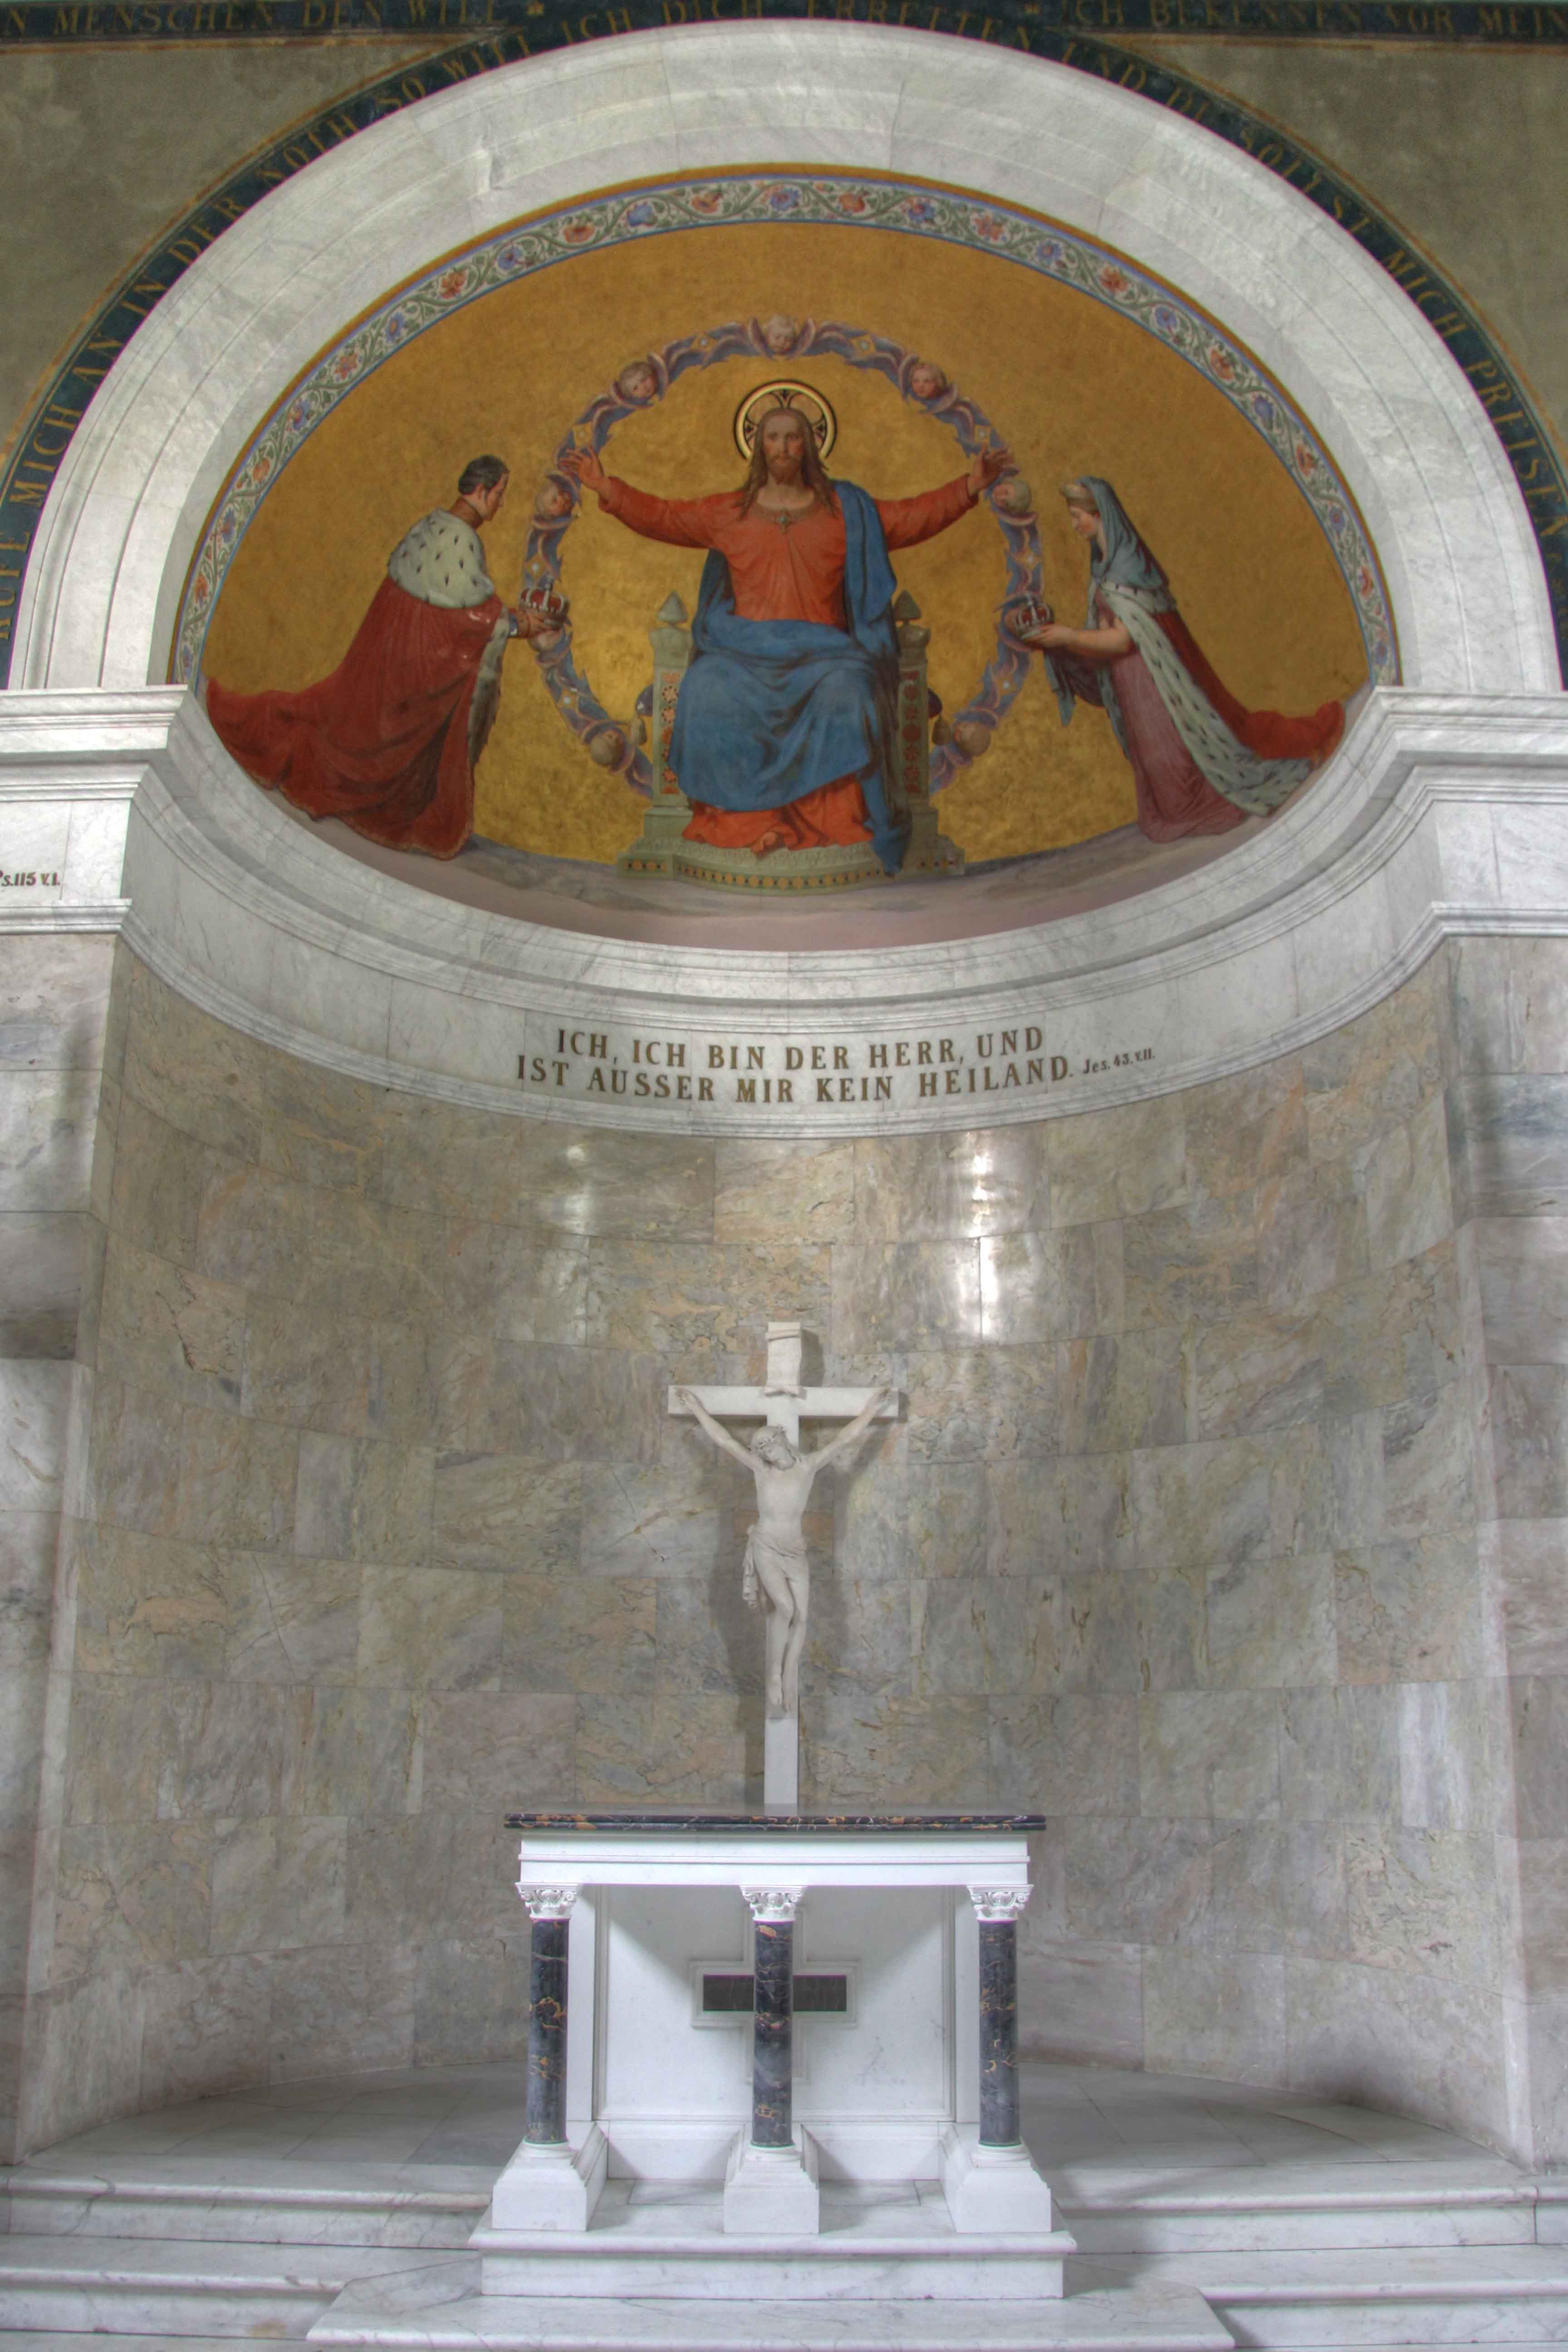 The Altar in The Mausoleum in The Palace Gardens of Schloss Charlottenburg in Berlin